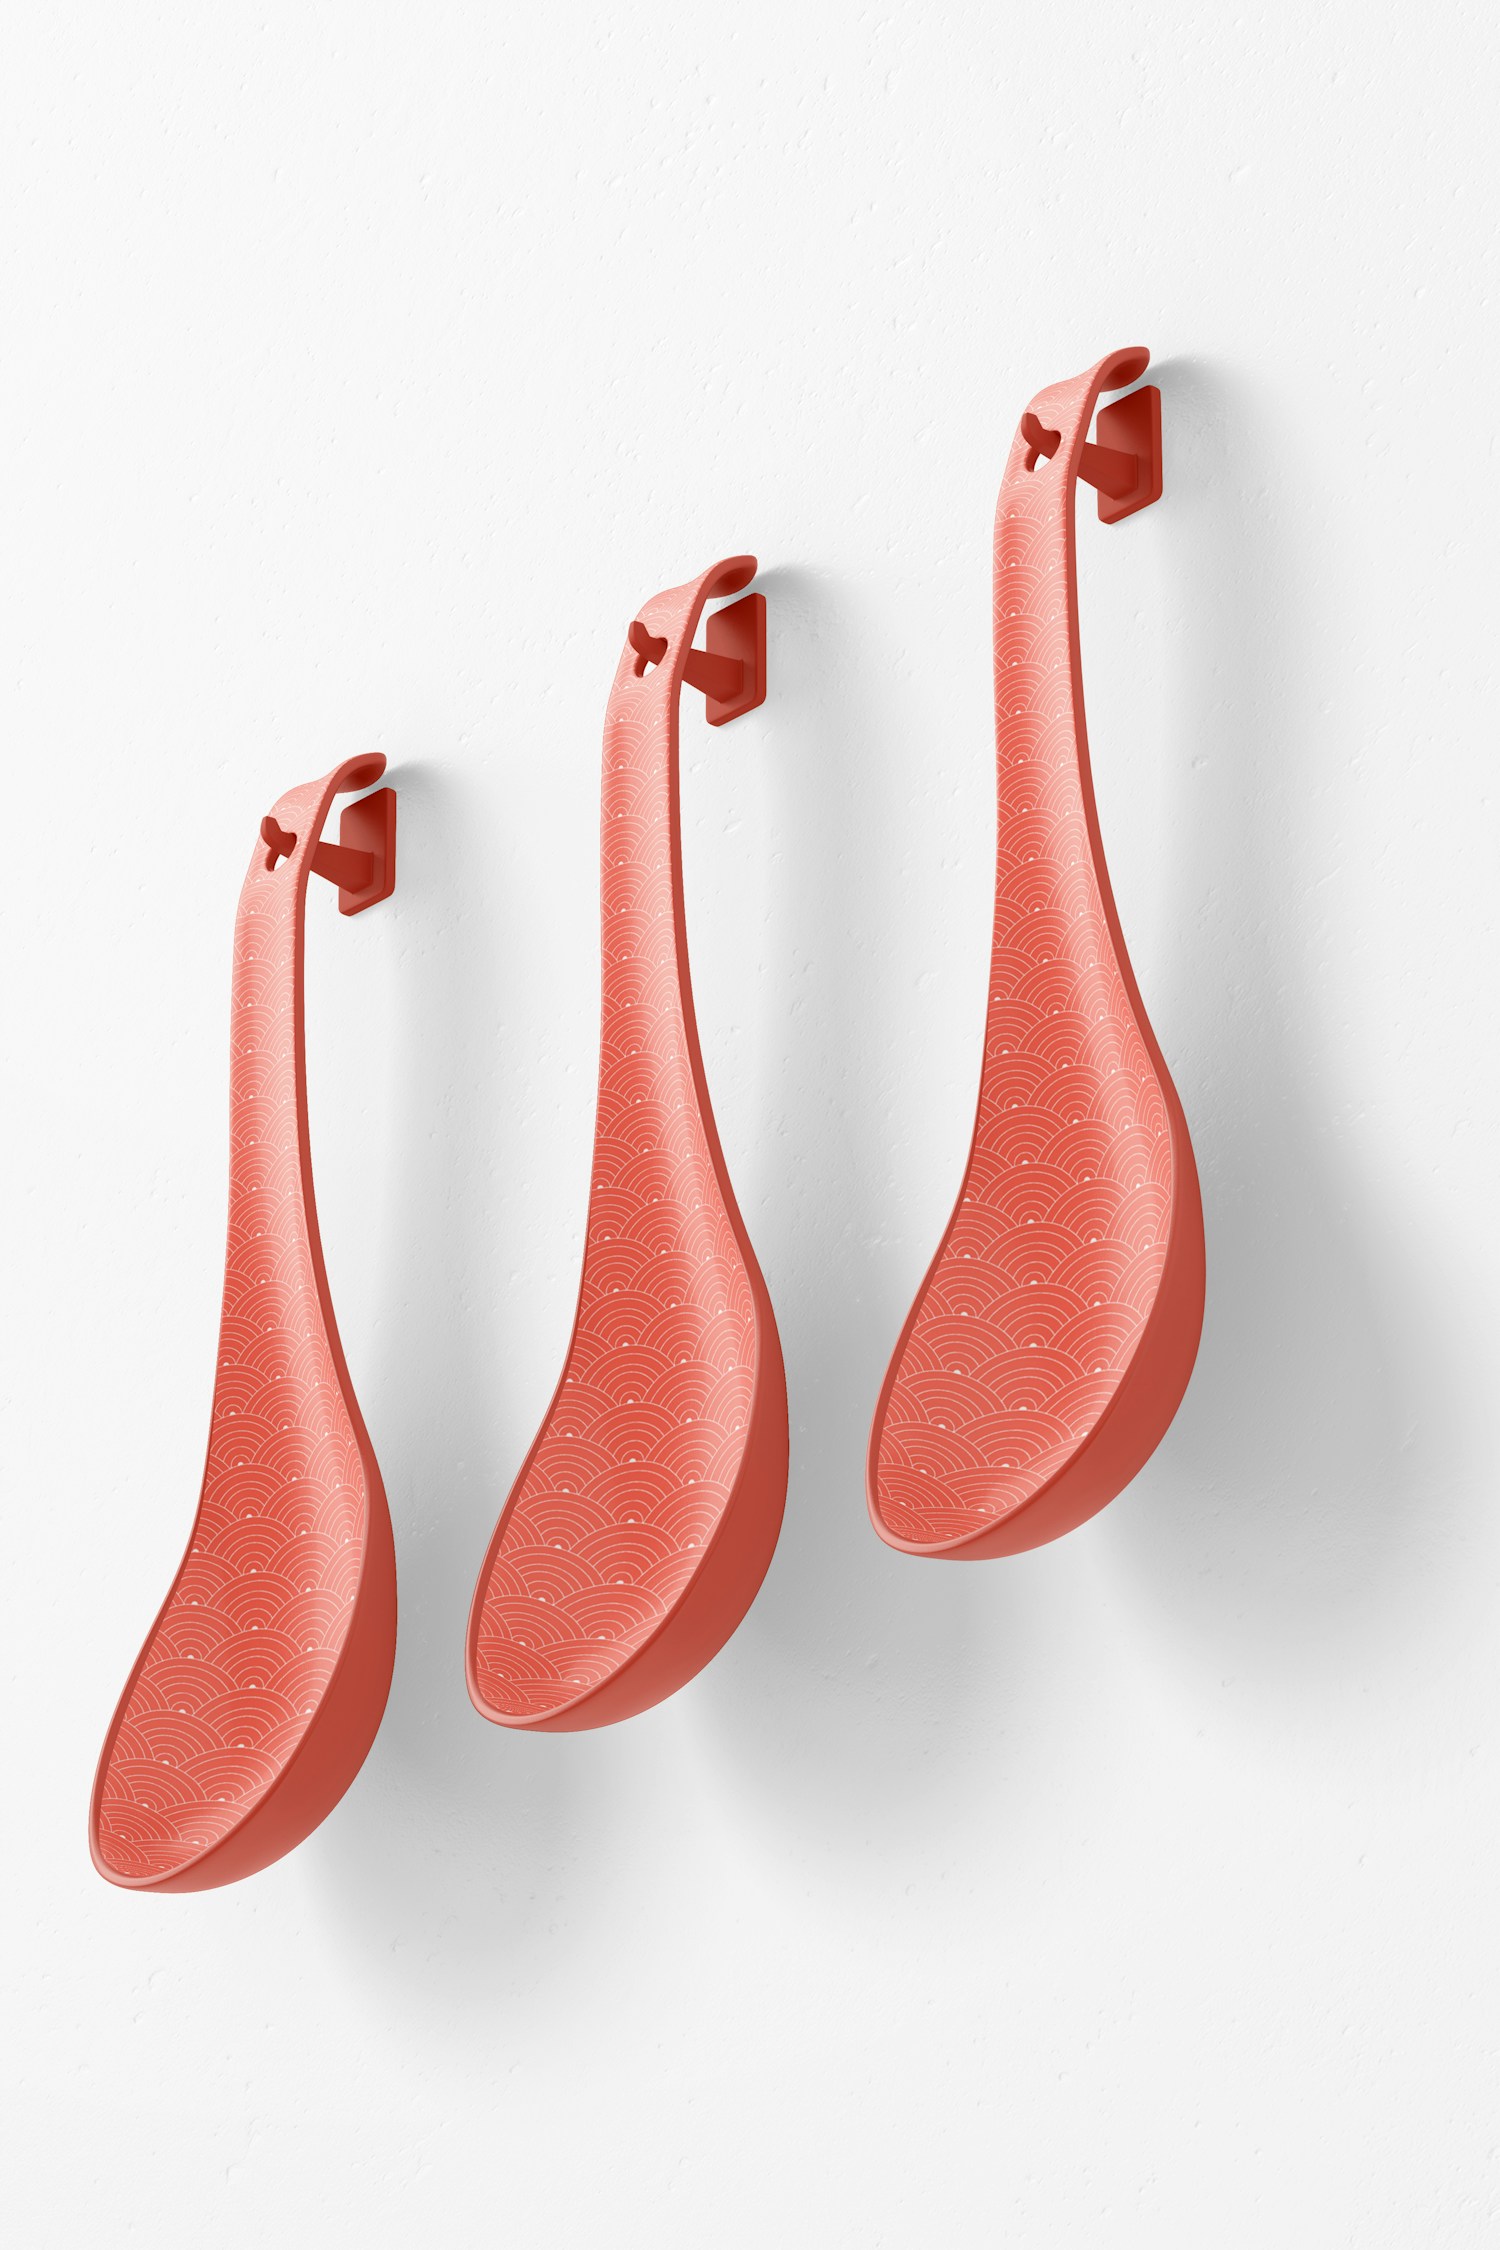 Asian Soup Spoons Mockup, Hanging on Wall